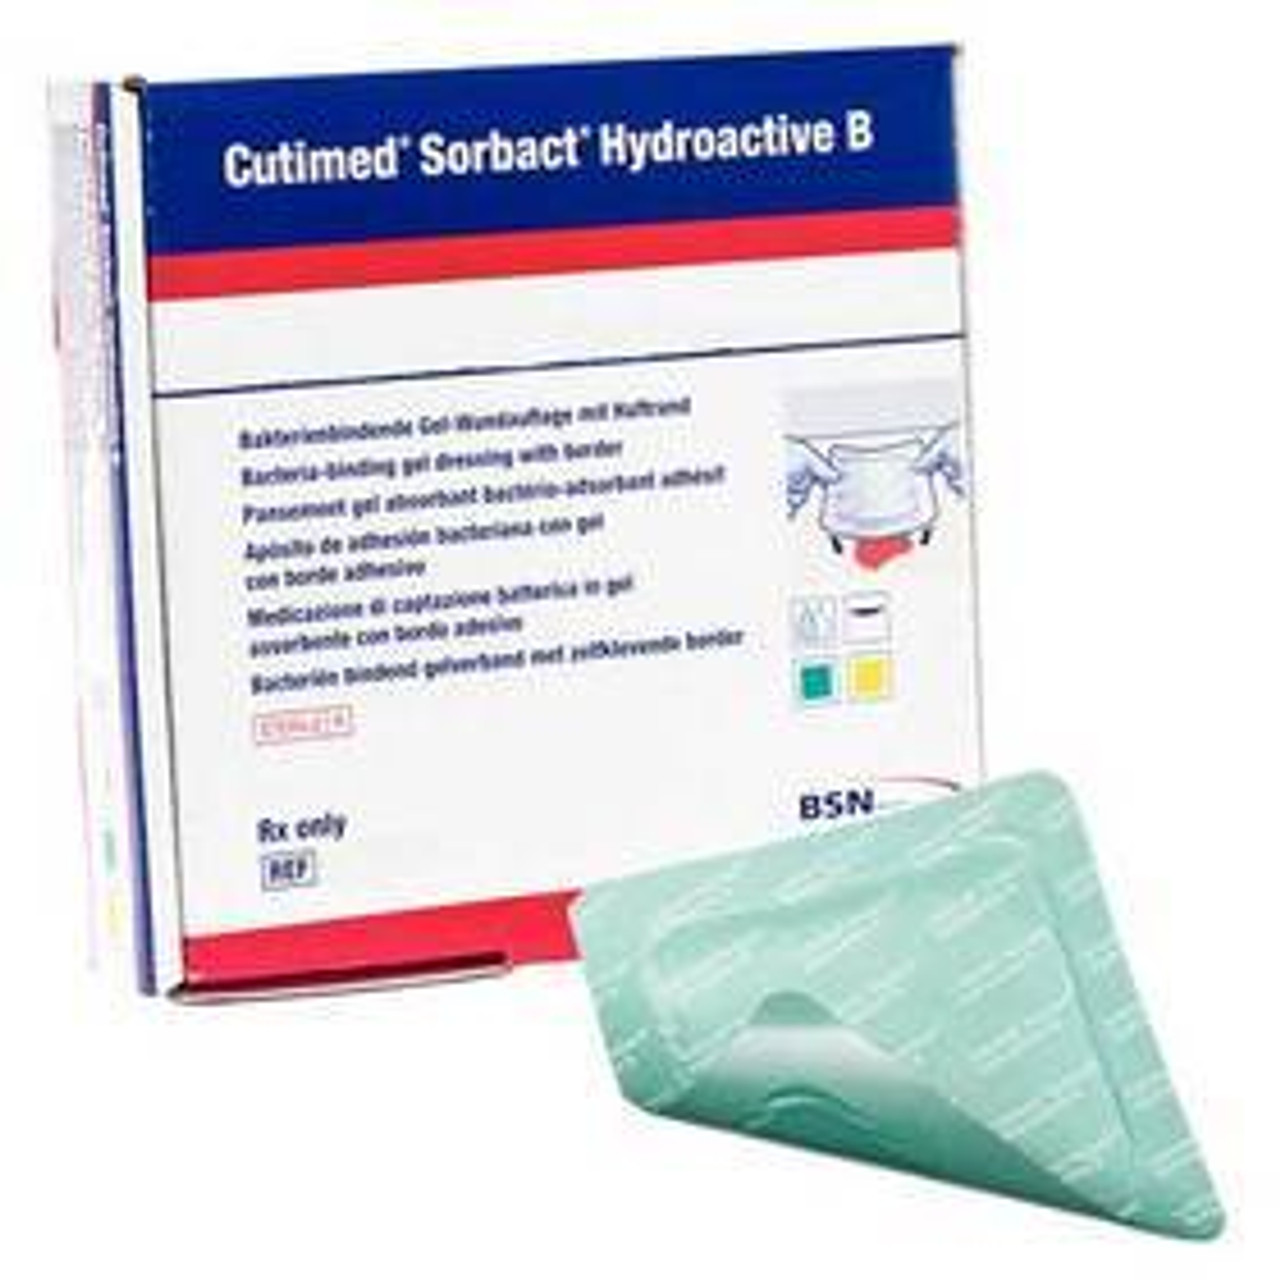 BSN-7216400 BX/40 CUTIMED SORBACT ANTIMICROBIAL DRESSING W/BACTERIA BINDING ACTION 4CM X6CM